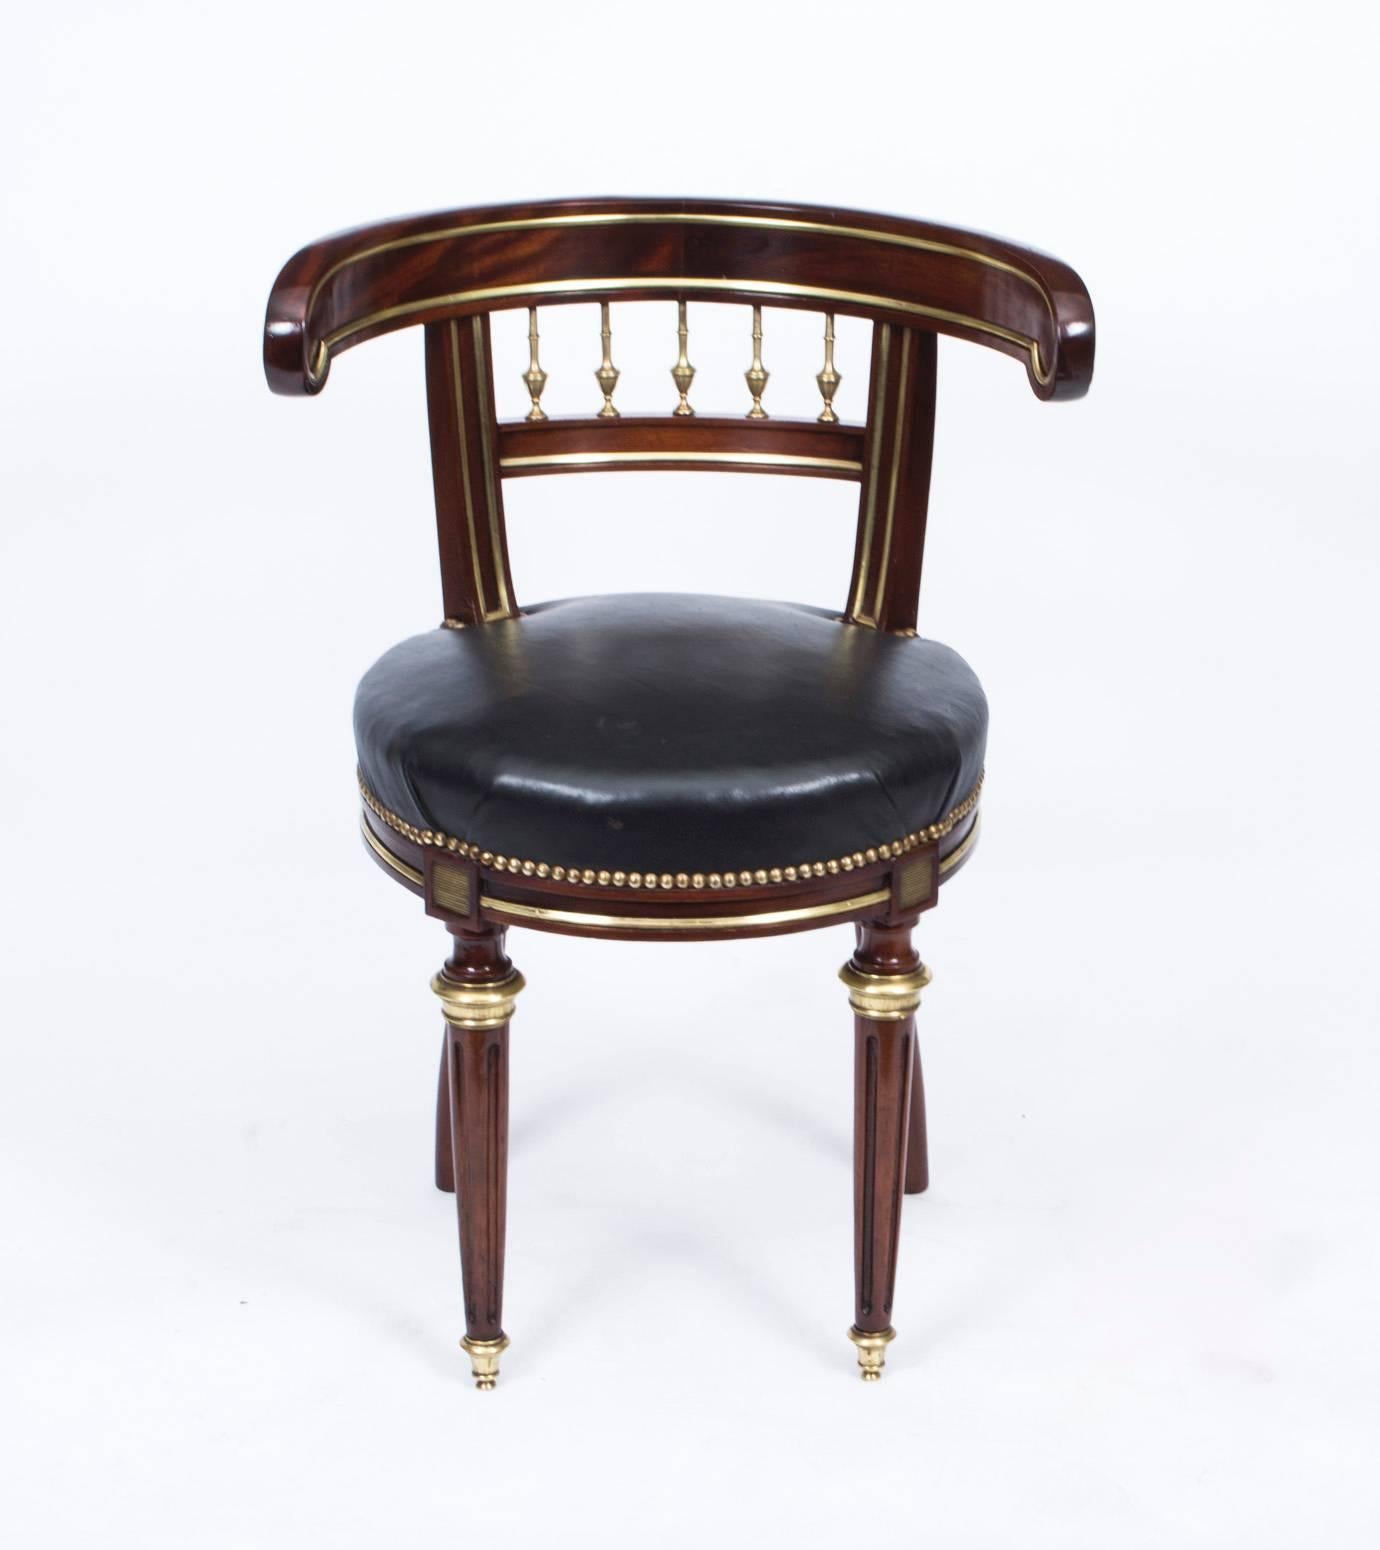 This is a beautiful antique French Empire flame mahogany desk chair with Russian influences, circa 1880 in date.

The flame mahogany is beautiful in color and has been embellished with striking brass inlay and decorative ormolu mounts.

It has